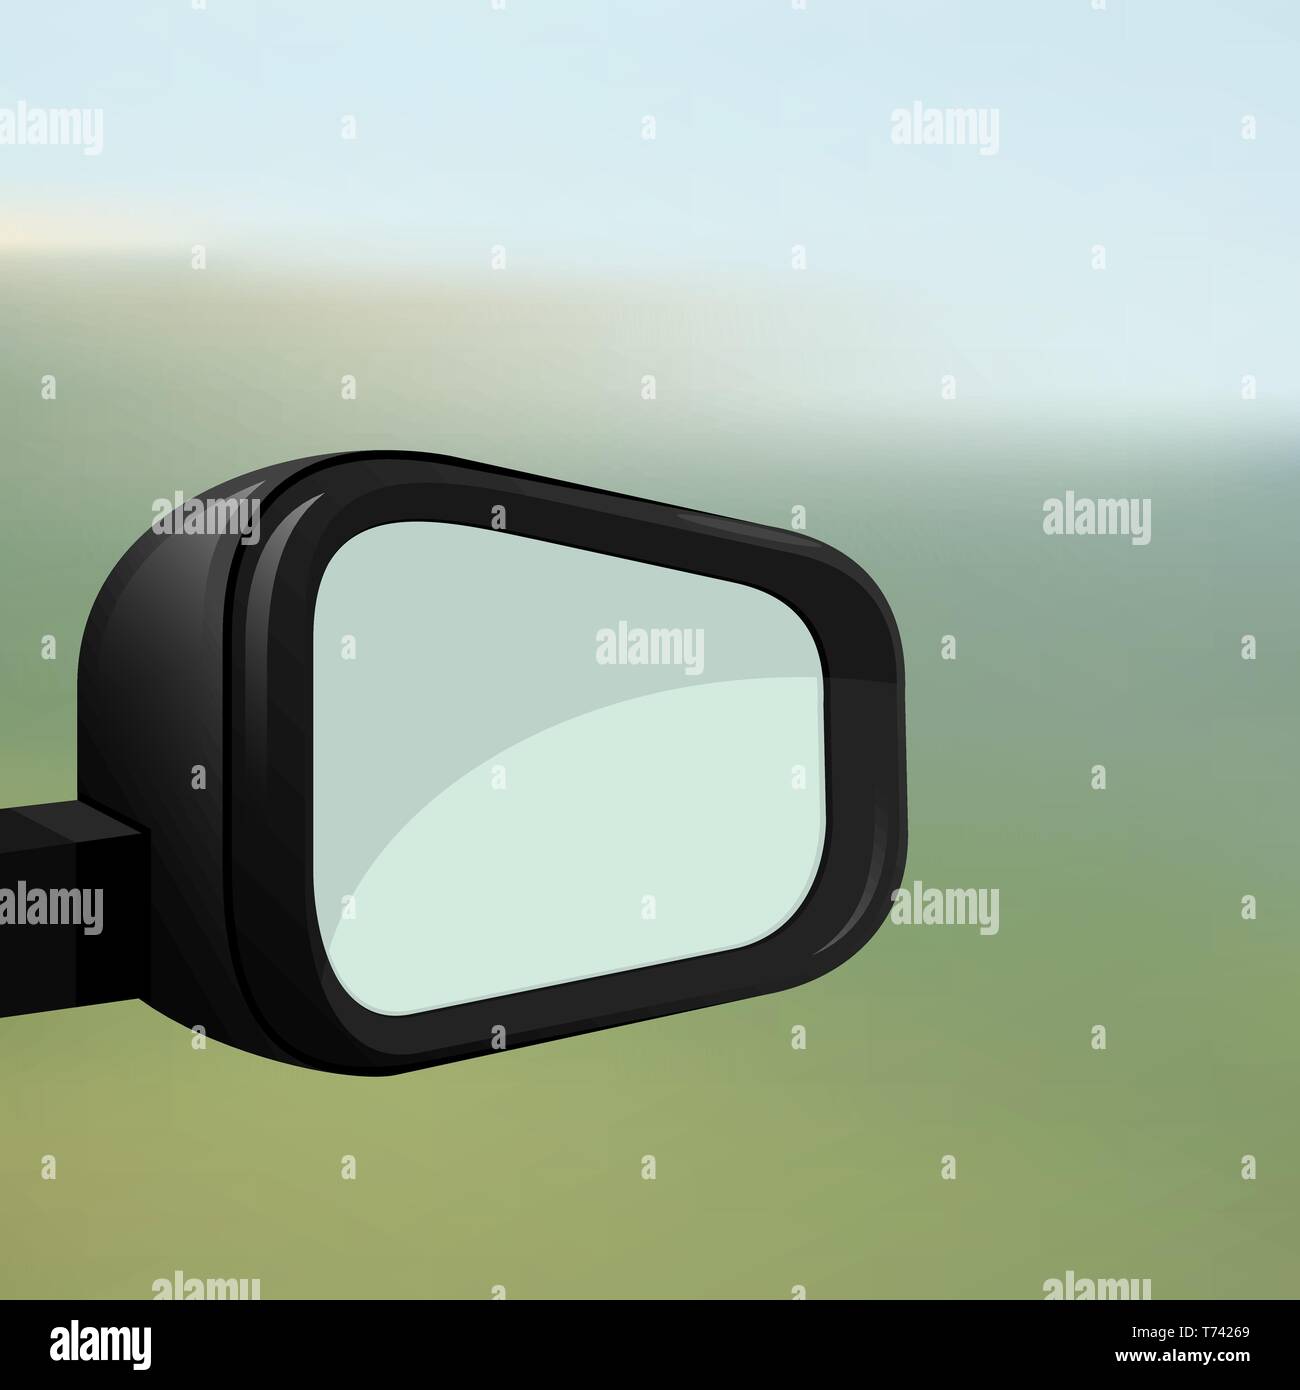 Car rearview mirror on a blurred background. Stock Vector